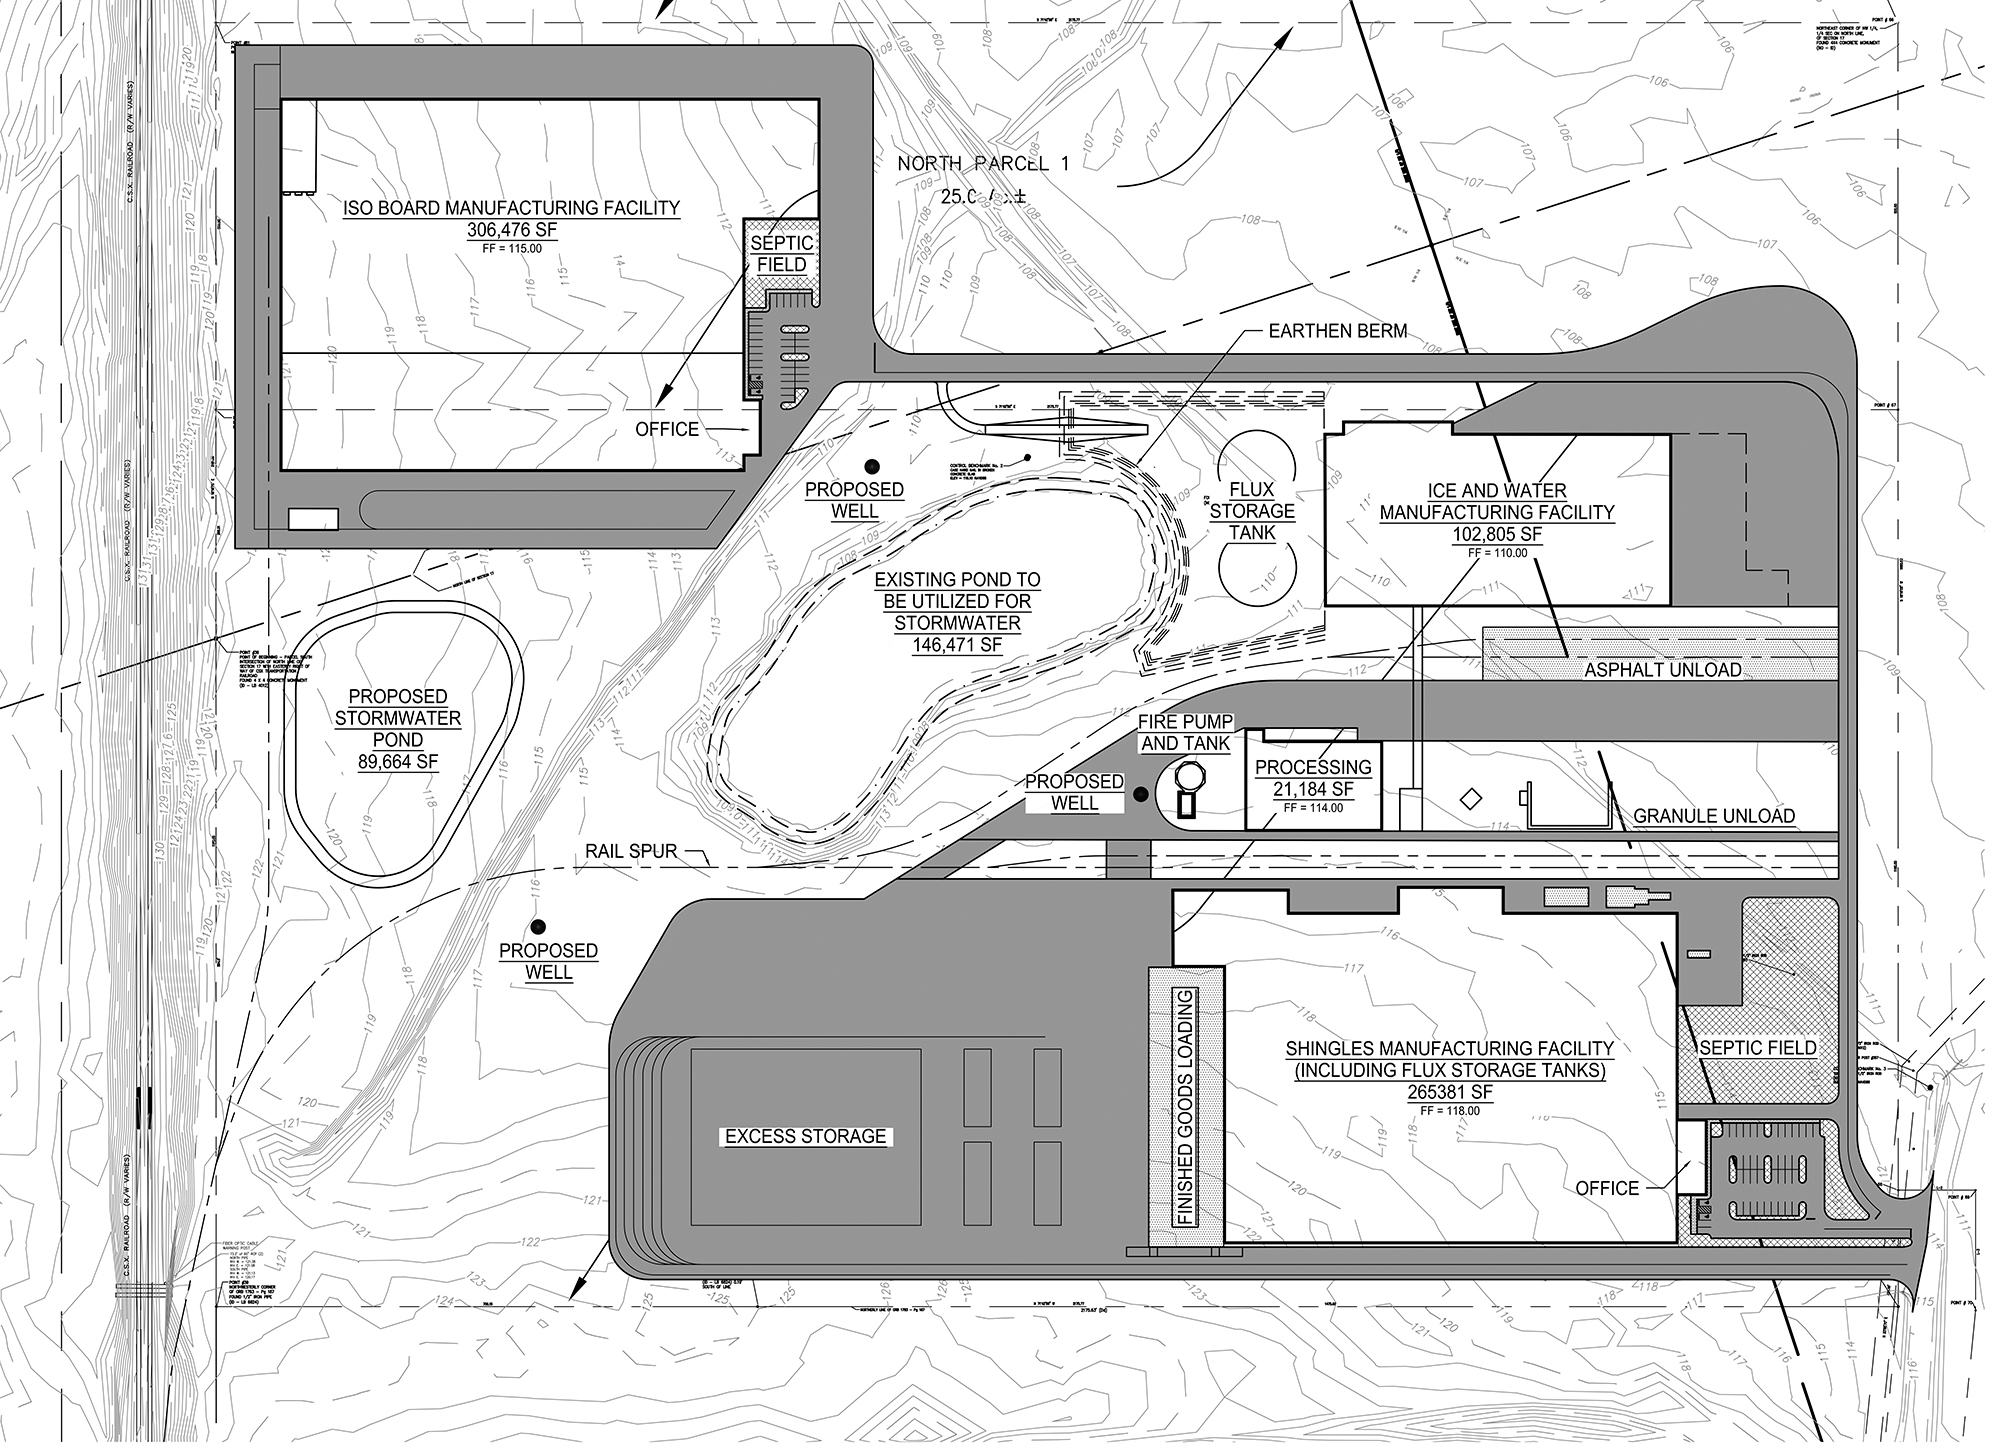 A conceptual site plan for IKO Project Gator shows several manufacturing buildings totaling about 700,000 square feet.